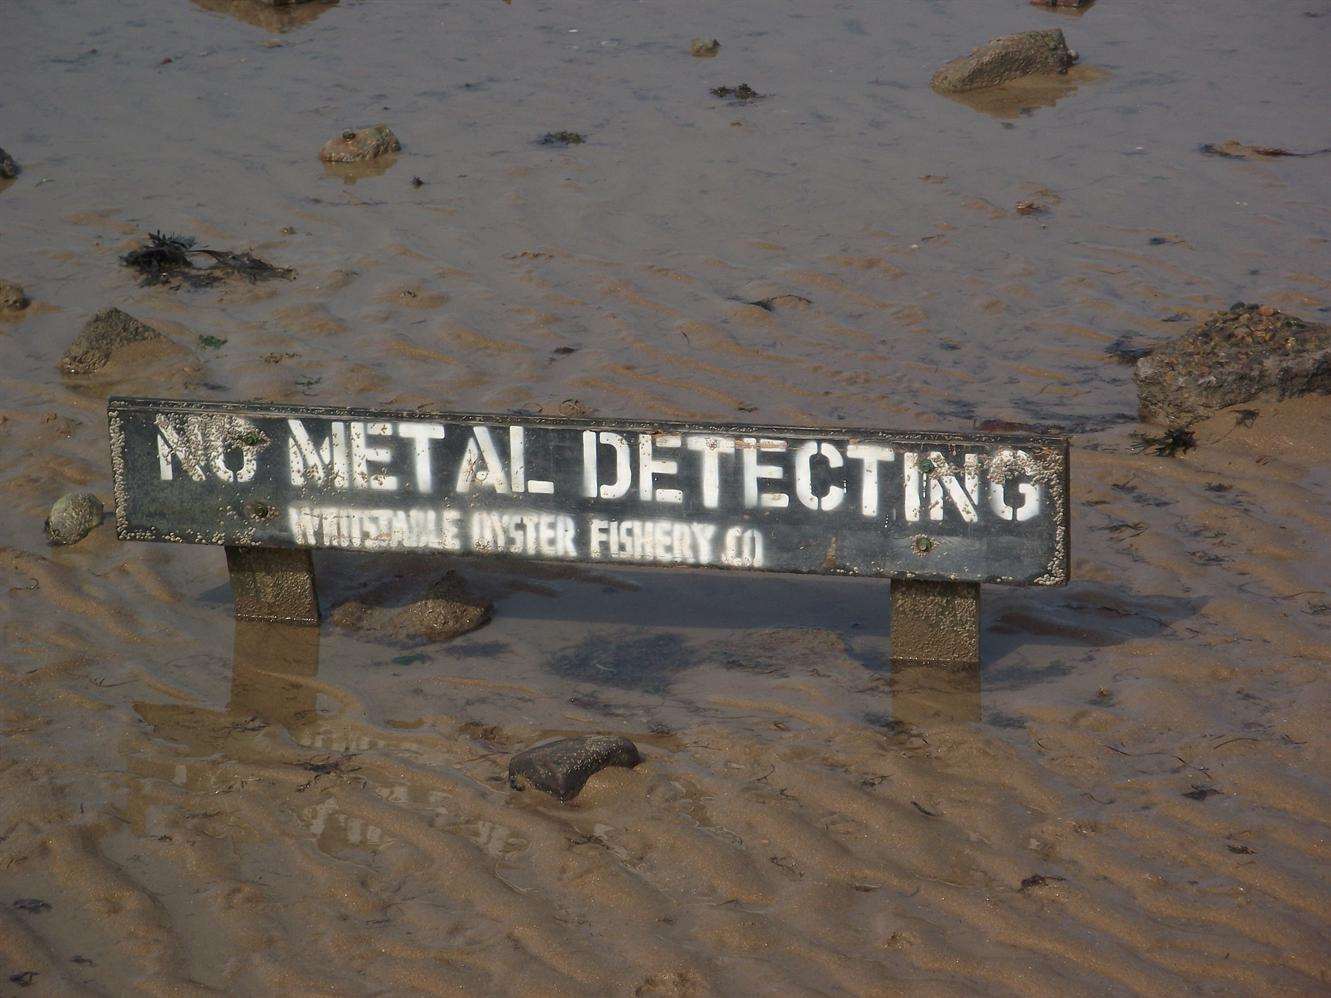 The oyster company has erected a sign to warn off detectorists